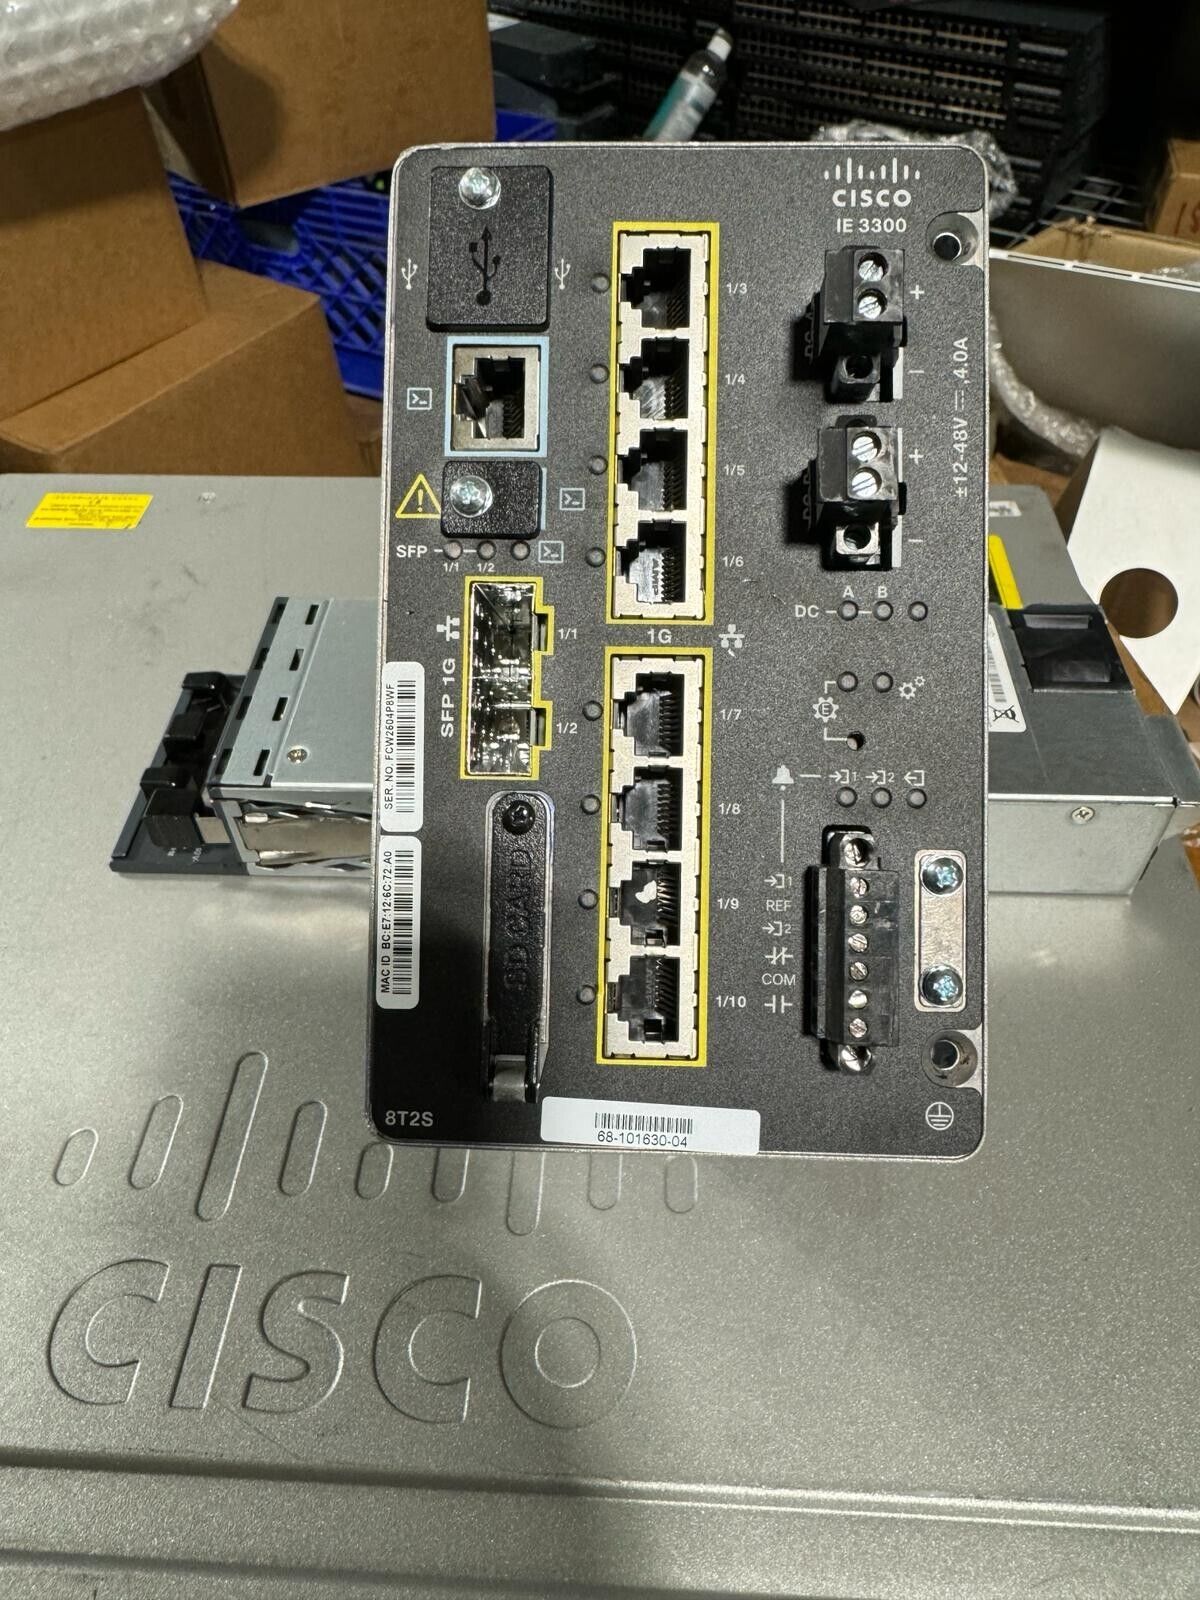 Cisco IE-3300-8T2S-E Industrial Ethernet Switch